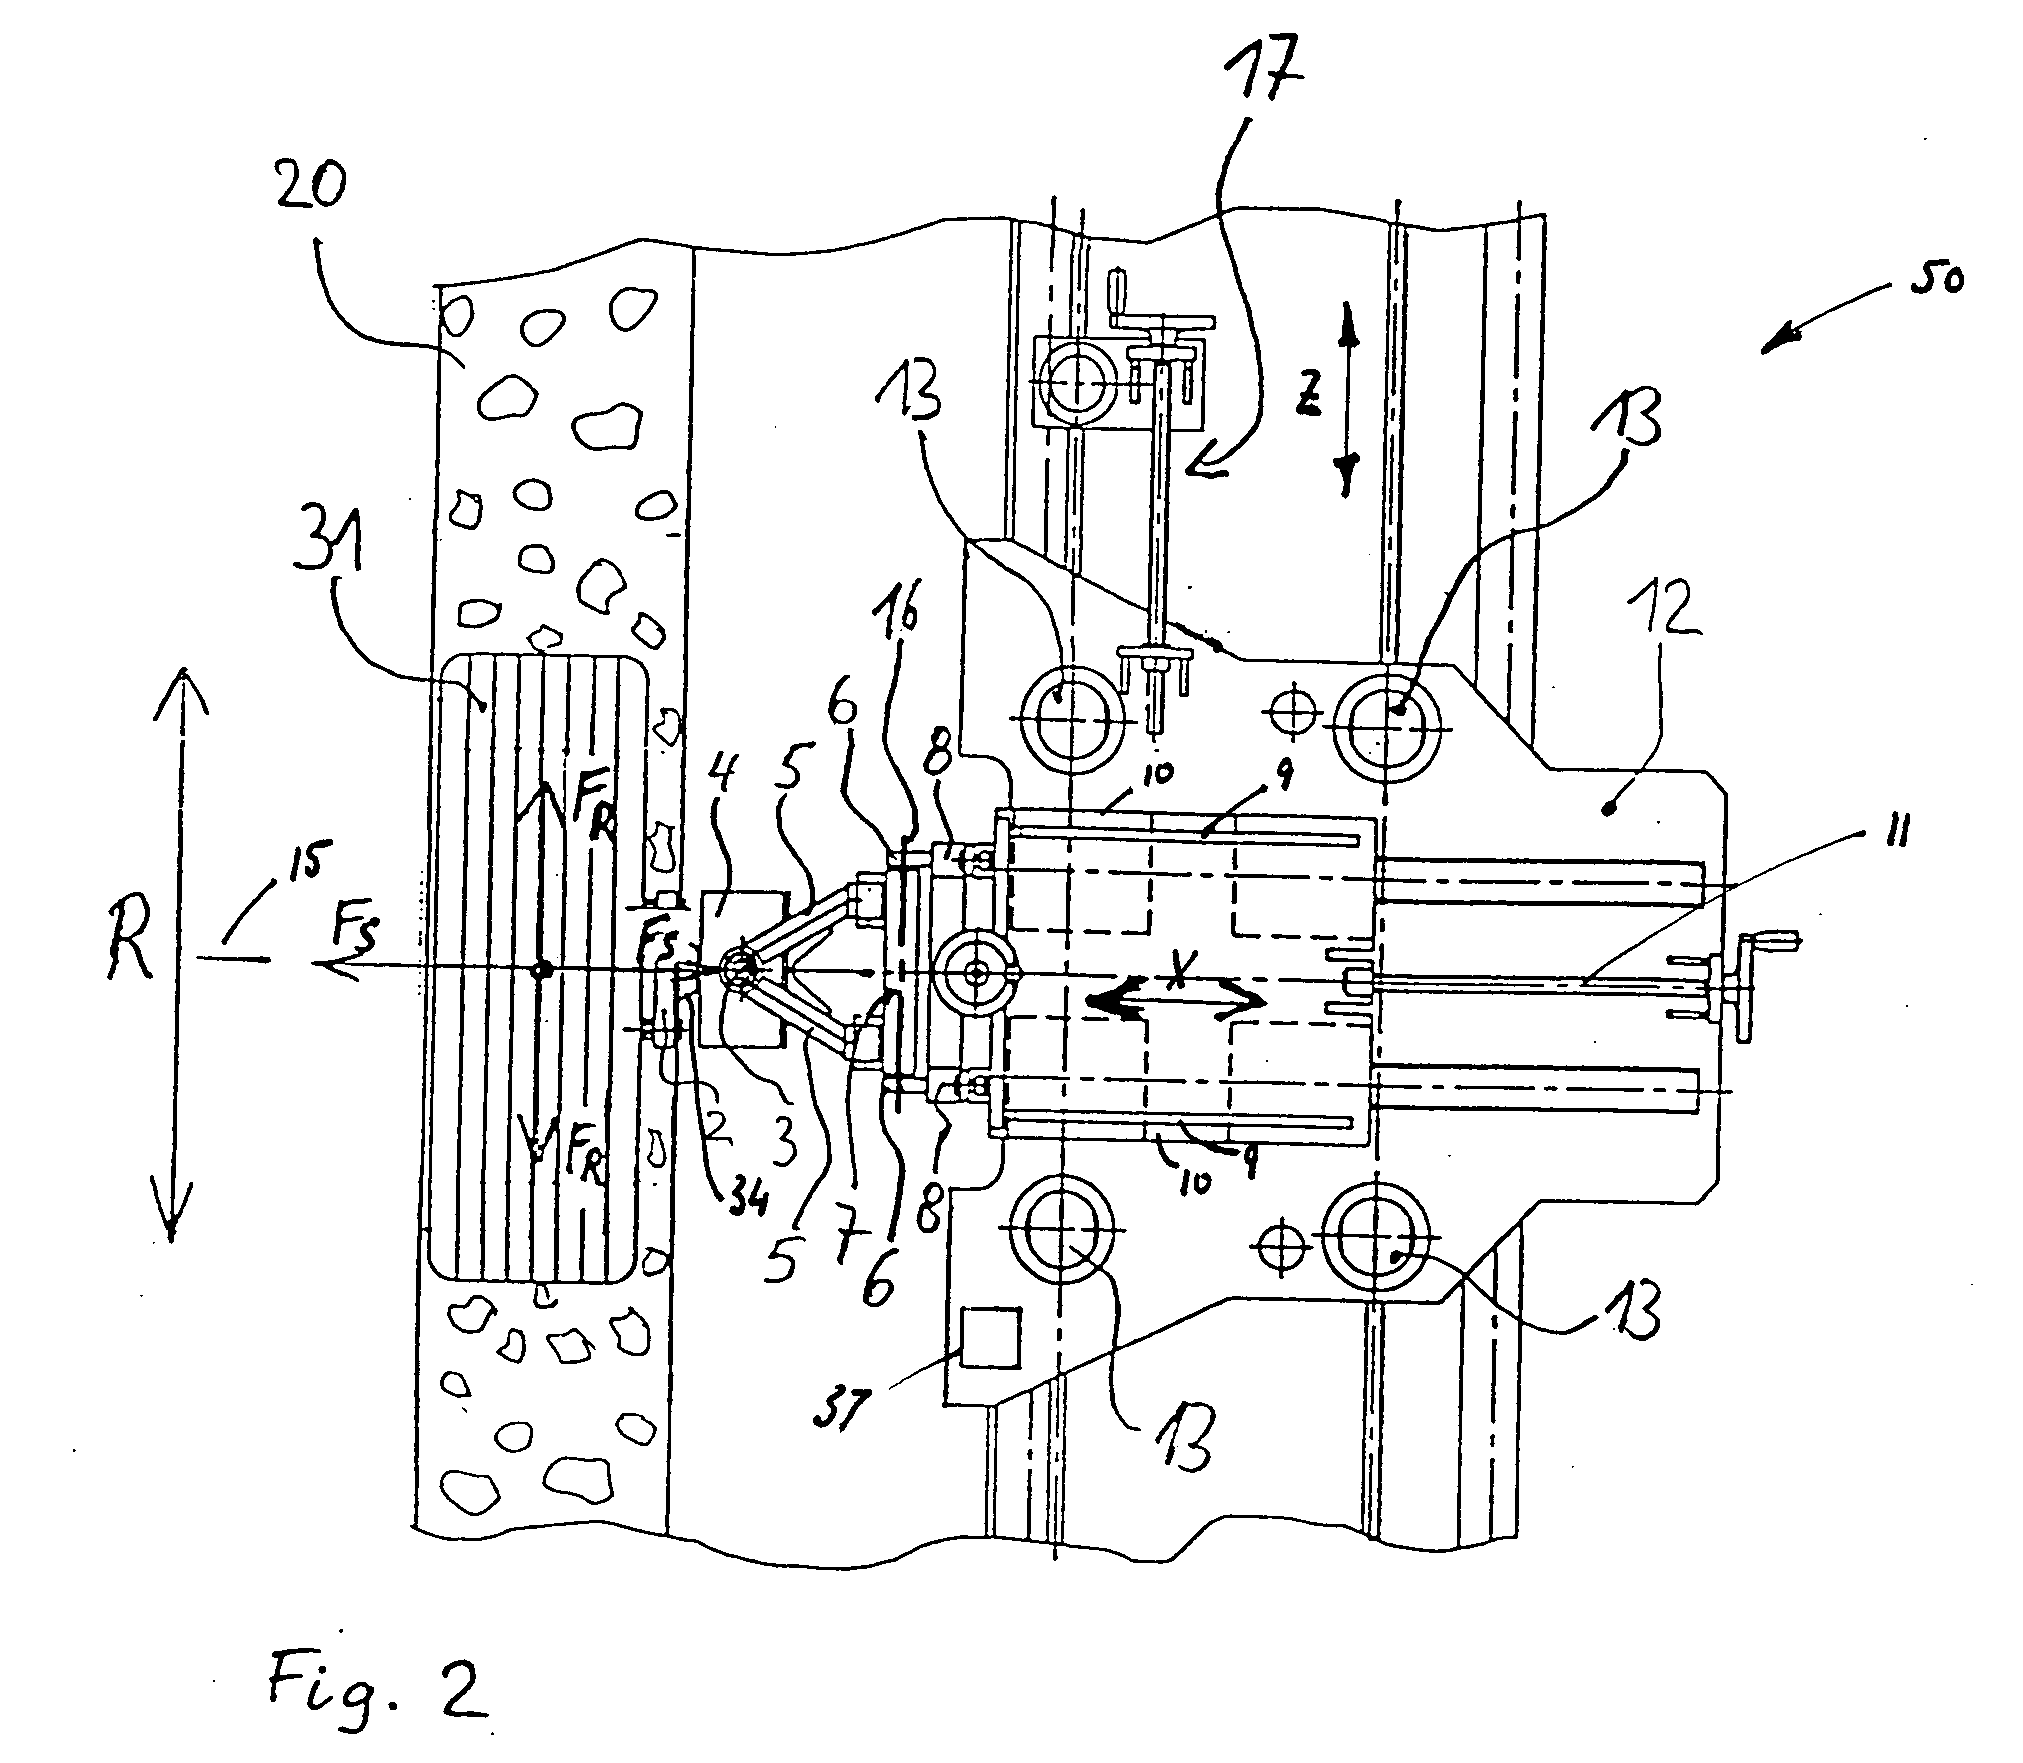 Method and device for simulating slip on vehicle test benches